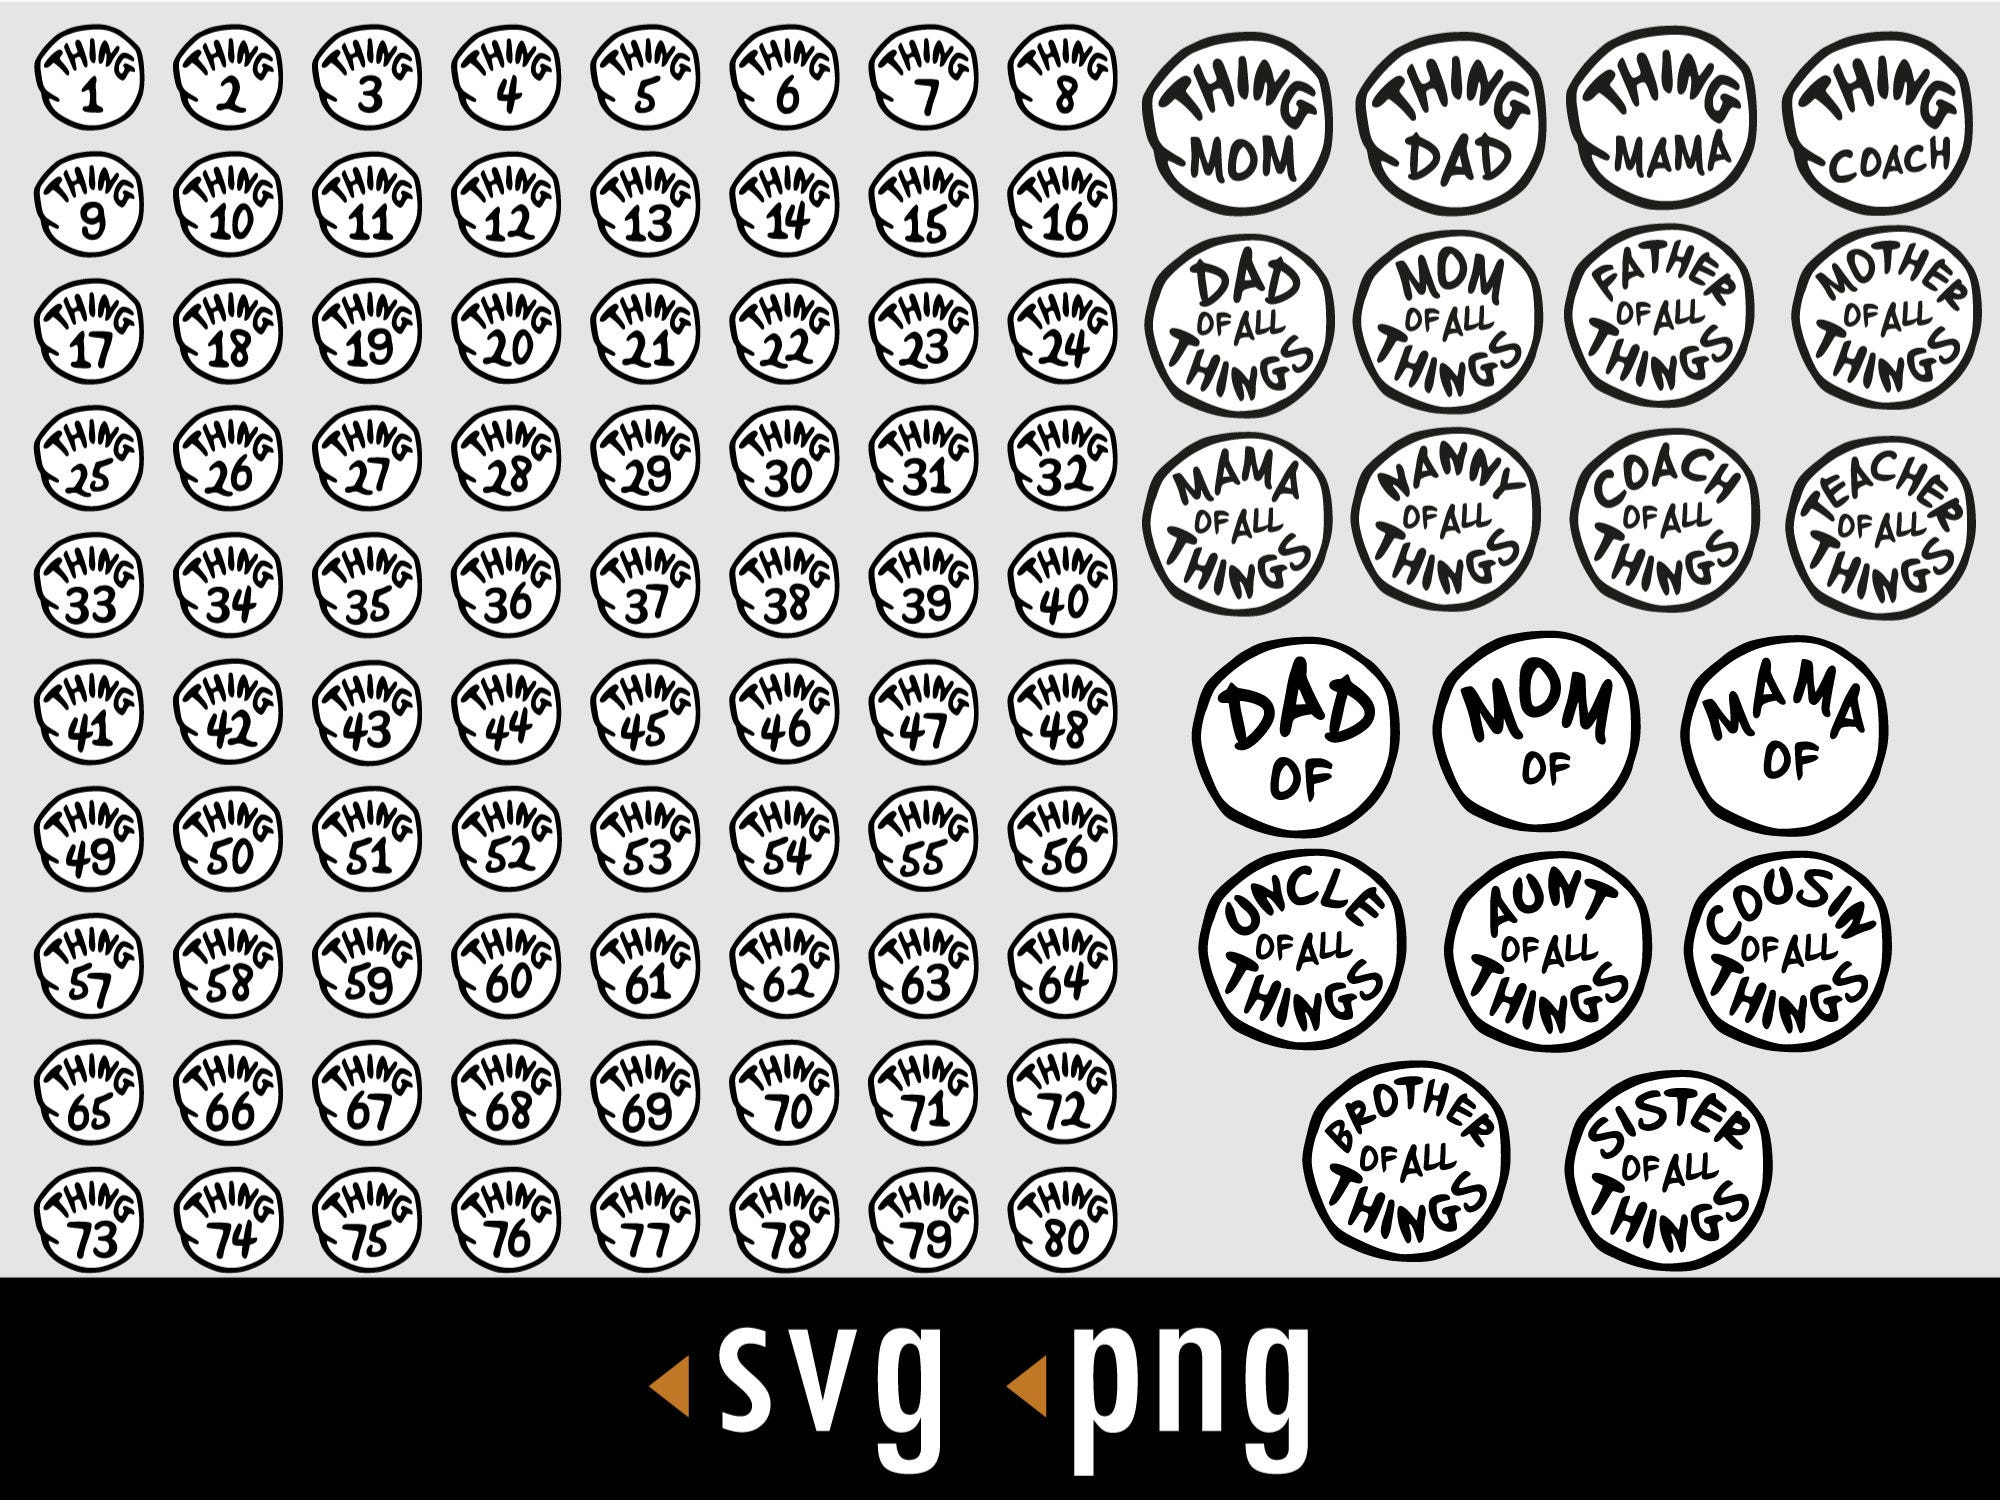 Thing 1 Svg, Thing 2 Svg, Thing Layered, Mother of all things Svg, Cut files for Cricut, instant download, COD062